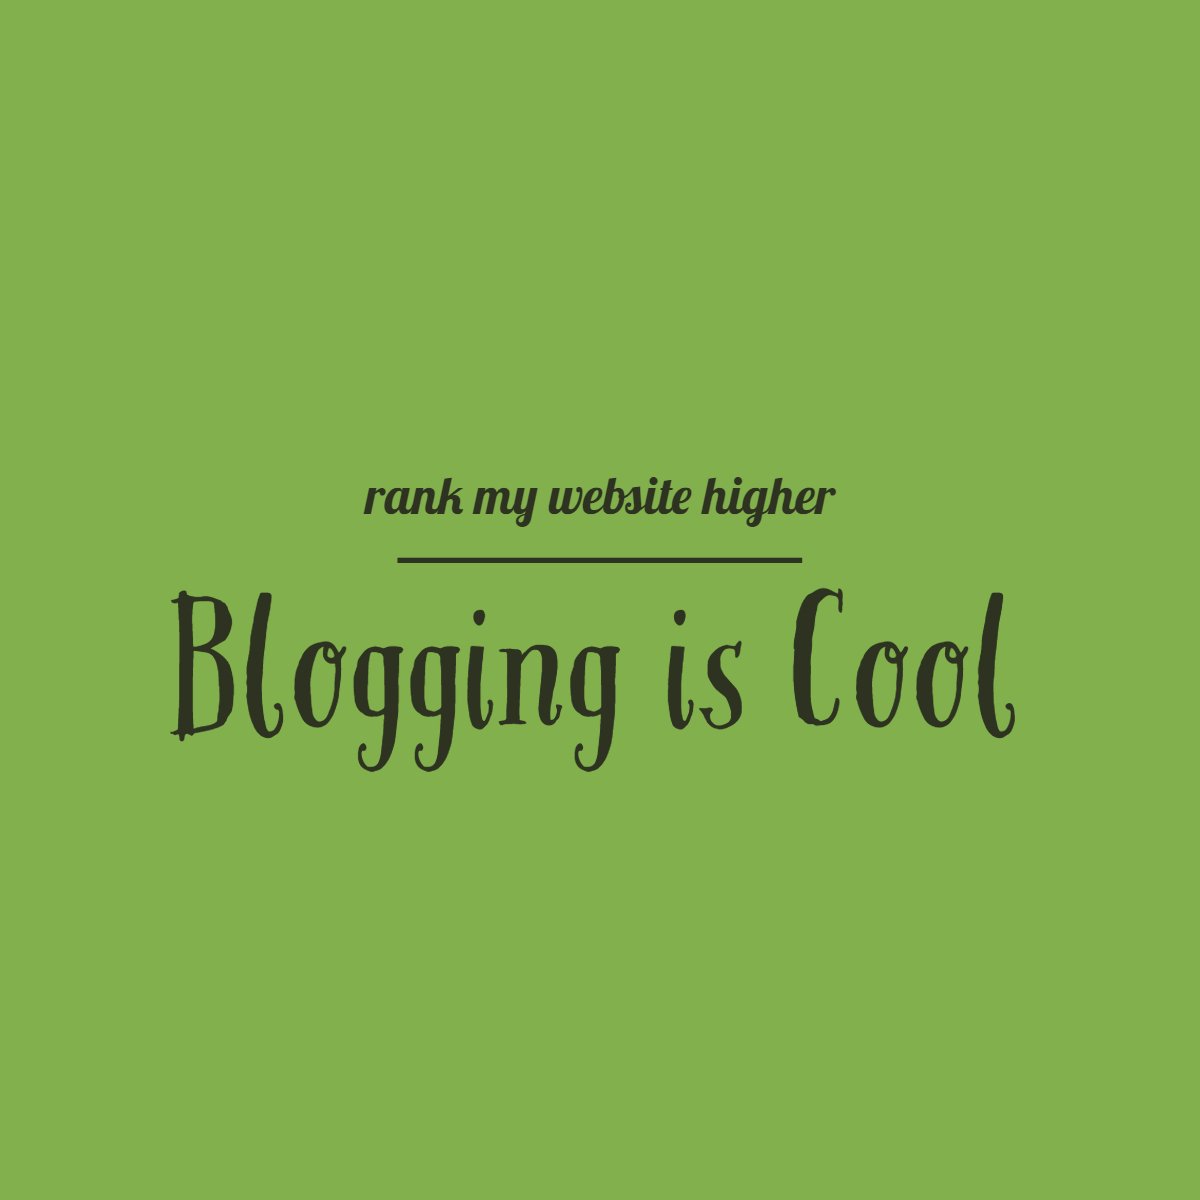 Bloggingiscool.com how to name your new blogging business